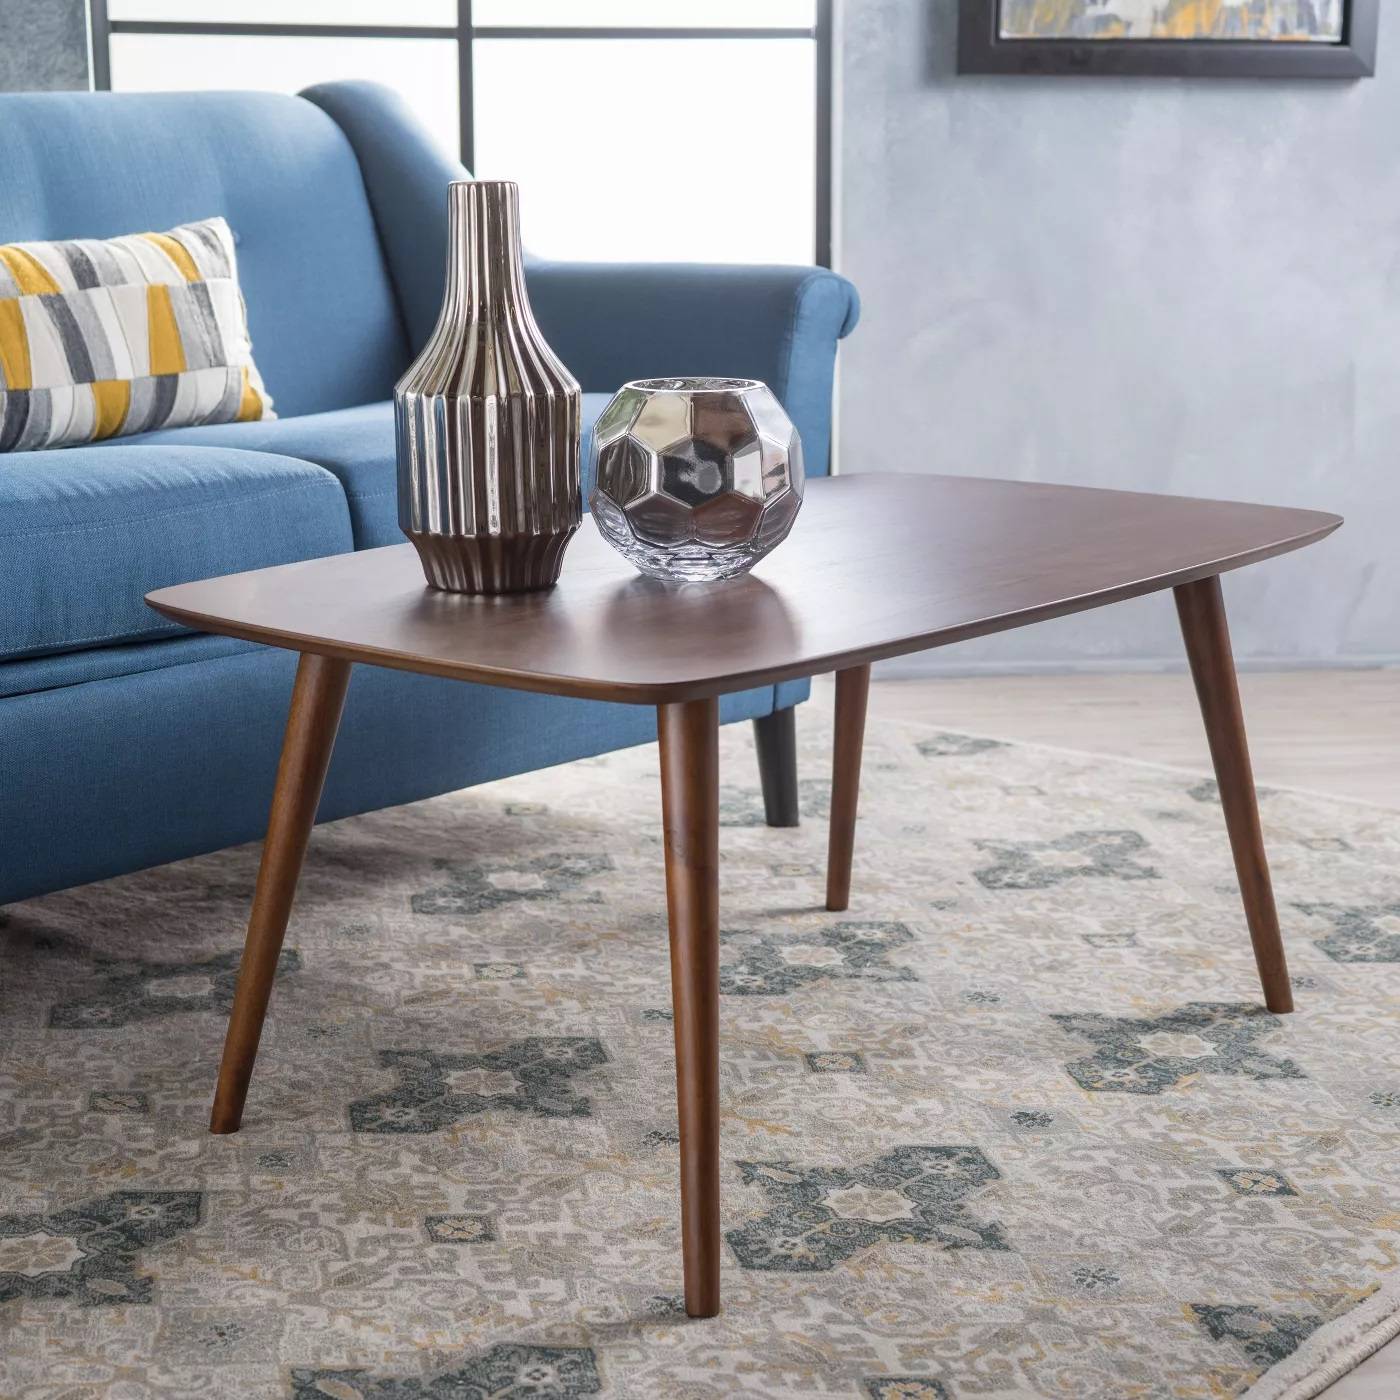 Cilla Coffee Table from Target